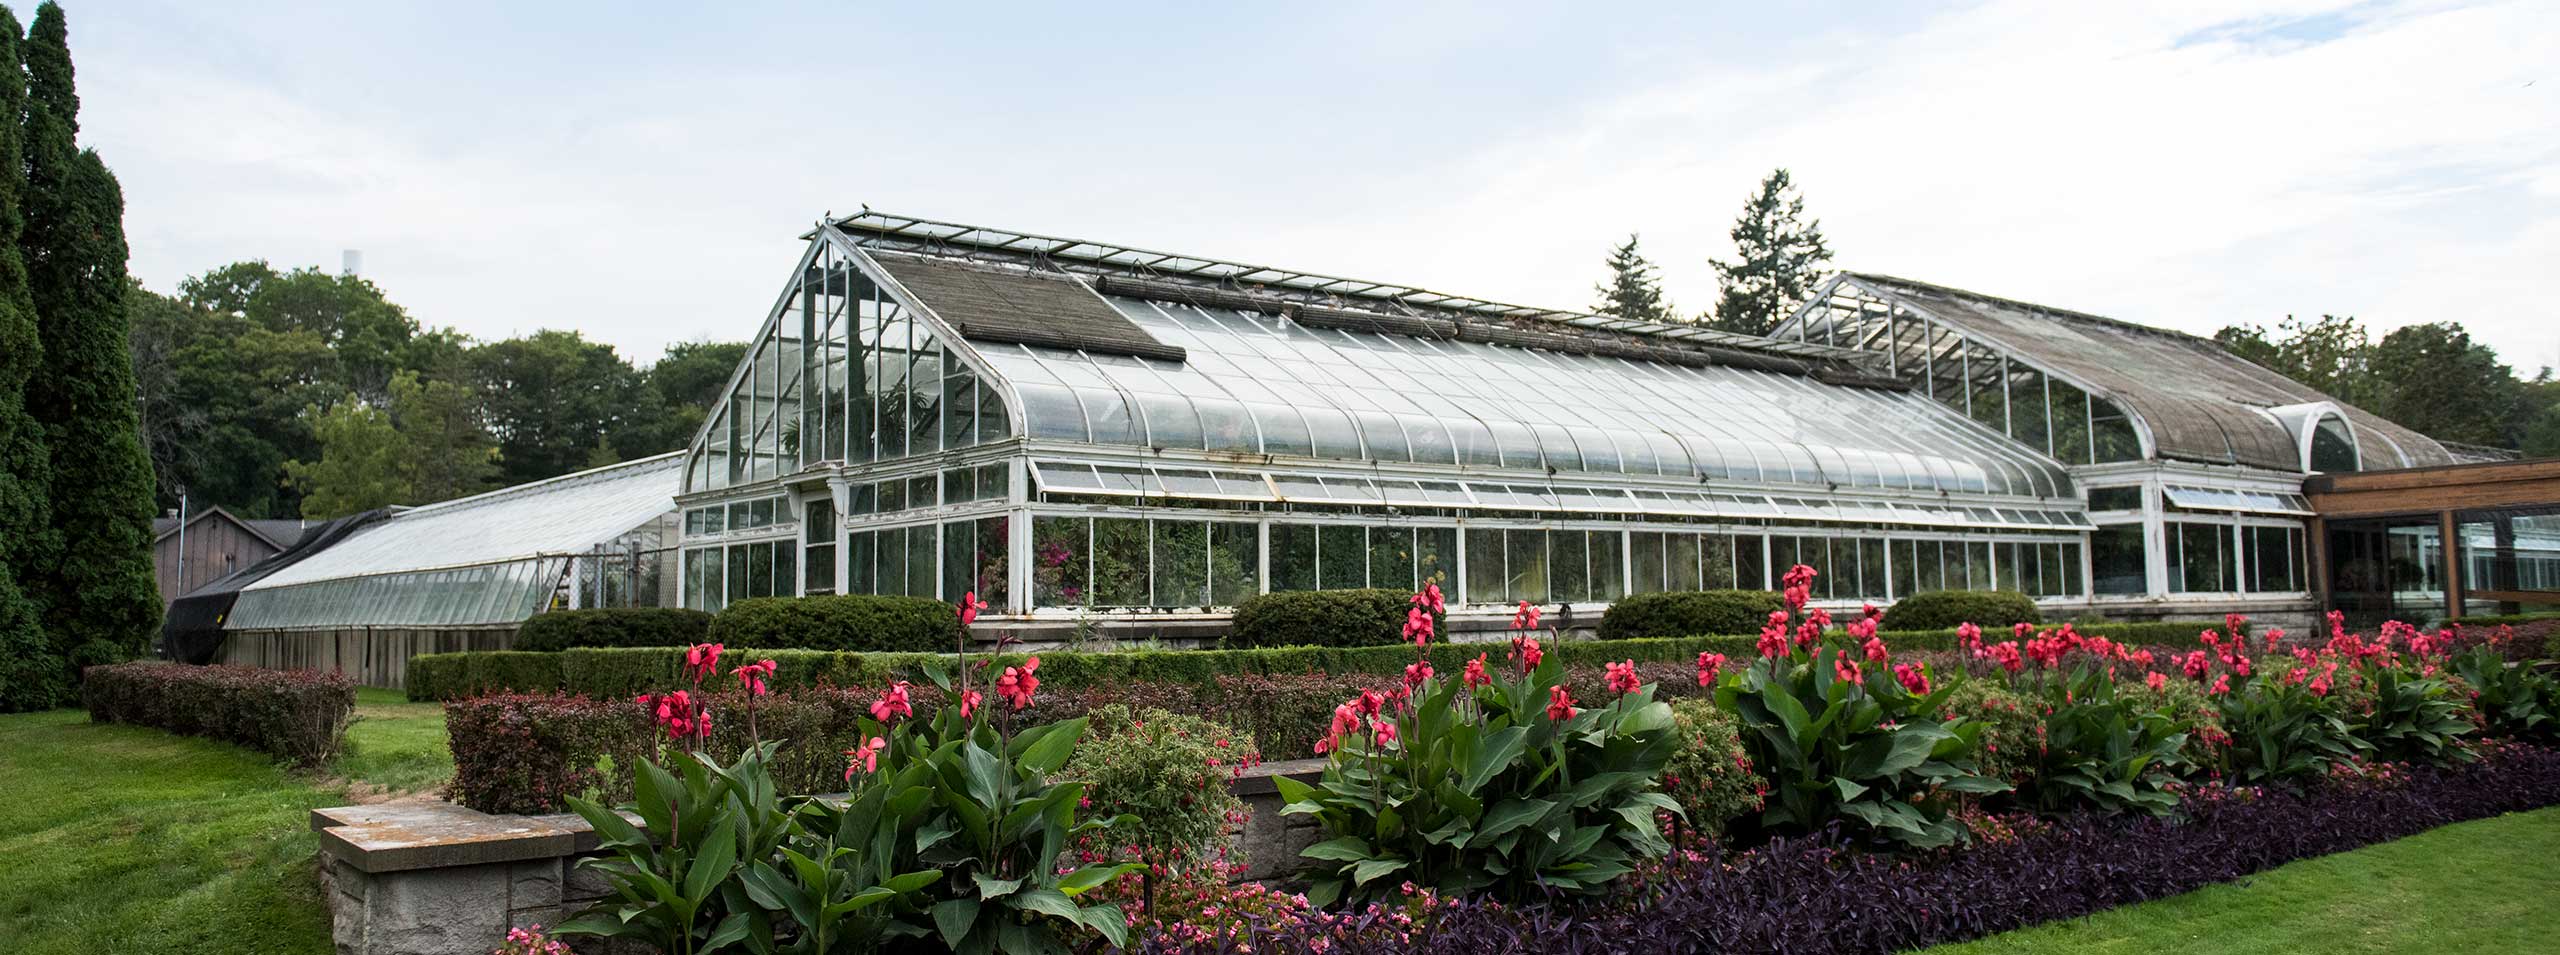 The exterior view of the Floral Showhouse Greenhouse